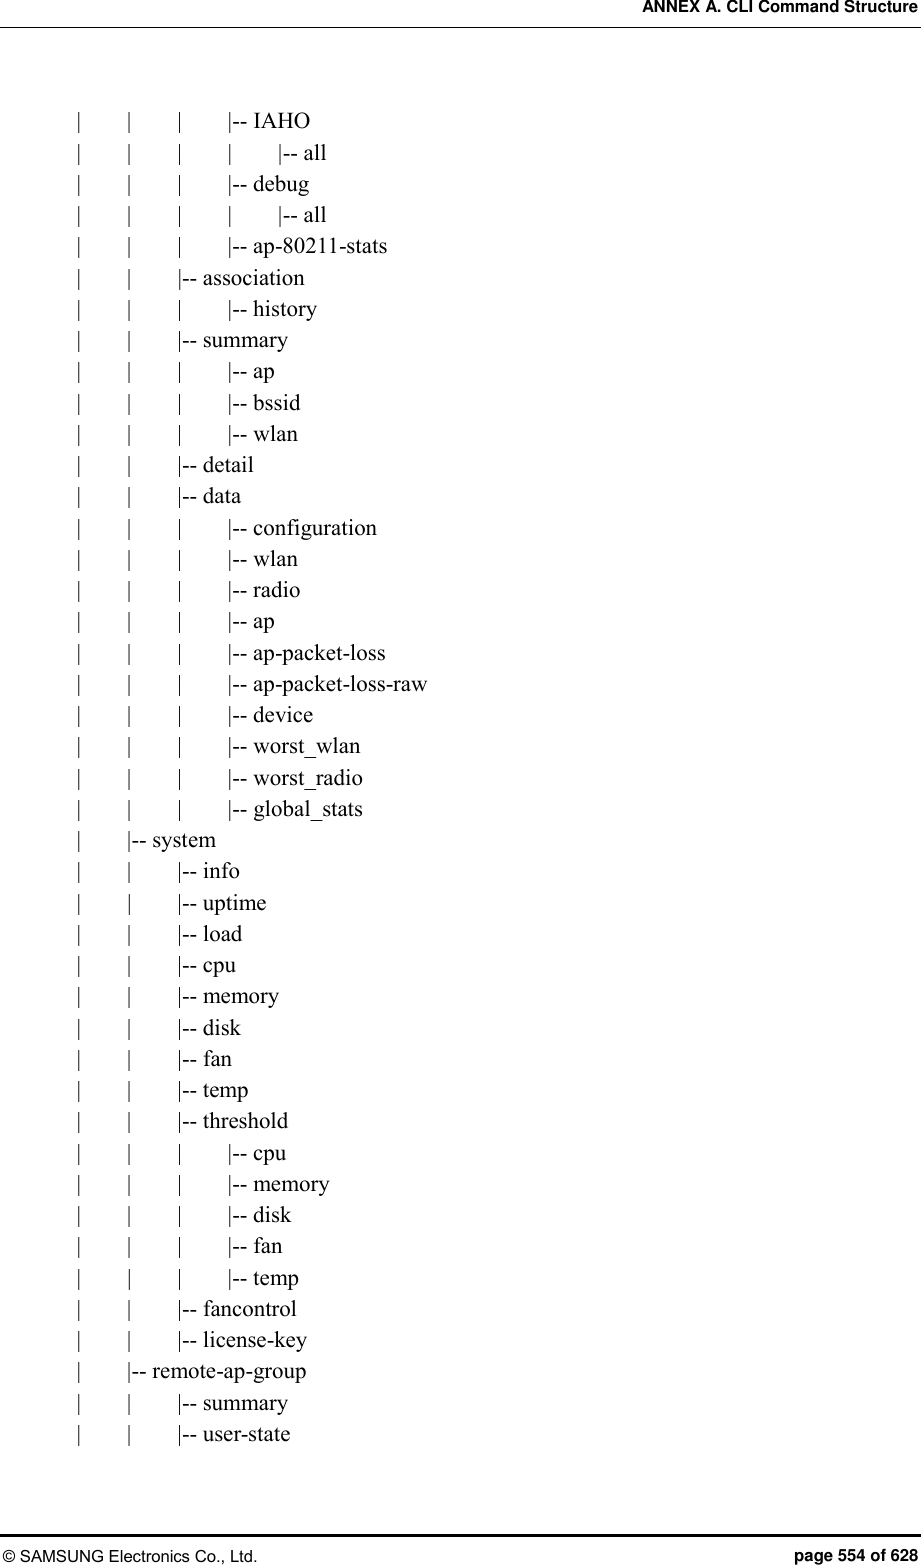 ANNEX A. CLI Command Structure © SAMSUNG Electronics Co., Ltd.  page 554 of 628 |        |        |        |-- IAHO |        |        |        |        |-- all |        |        |        |-- debug |        |        |        |        |-- all |        |        |        |-- ap-80211-stats |        |    |-- association |        |        |        |-- history |        |        |-- summary |        |        |        |-- ap |        |        |        |-- bssid |        |        |        |-- wlan |        |        |-- detail |        |        |-- data |        |        |        |-- configuration |        |        |        |-- wlan |        |        |        |-- radio |        |        |        |-- ap |        |        |        |-- ap-packet-loss |        |        |        |-- ap-packet-loss-raw |        |        |        |-- device |        |        |        |-- worst_wlan |        |        |        |-- worst_radio |        |        |        |-- global_stats |        |-- system |        |        |-- info |     |        |-- uptime |        |        |-- load |        |        |-- cpu |        |        |-- memory |        |        |-- disk |        |        |-- fan |        |        |-- temp |        |        |-- threshold |        |        |        |-- cpu |        |        |        |-- memory |        |        |        |-- disk |        |        |        |-- fan |      |        |        |-- temp |        |        |-- fancontrol |        |        |-- license-key |        |-- remote-ap-group |        |        |-- summary |        |        |-- user-state 